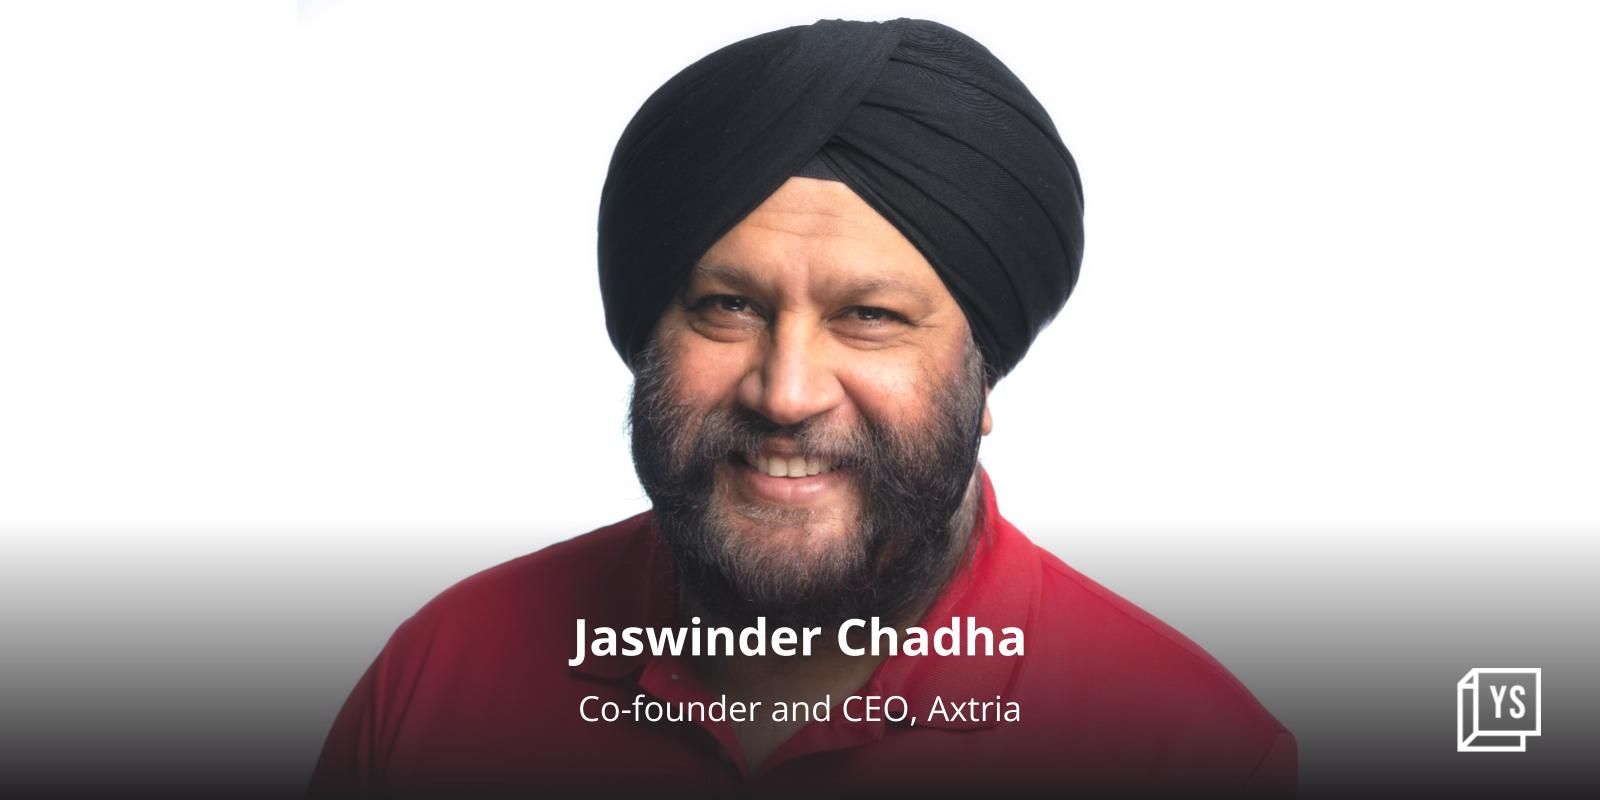 Axtria’s Jaswinder Chadha has a vision to reshape the pharma sector with technology